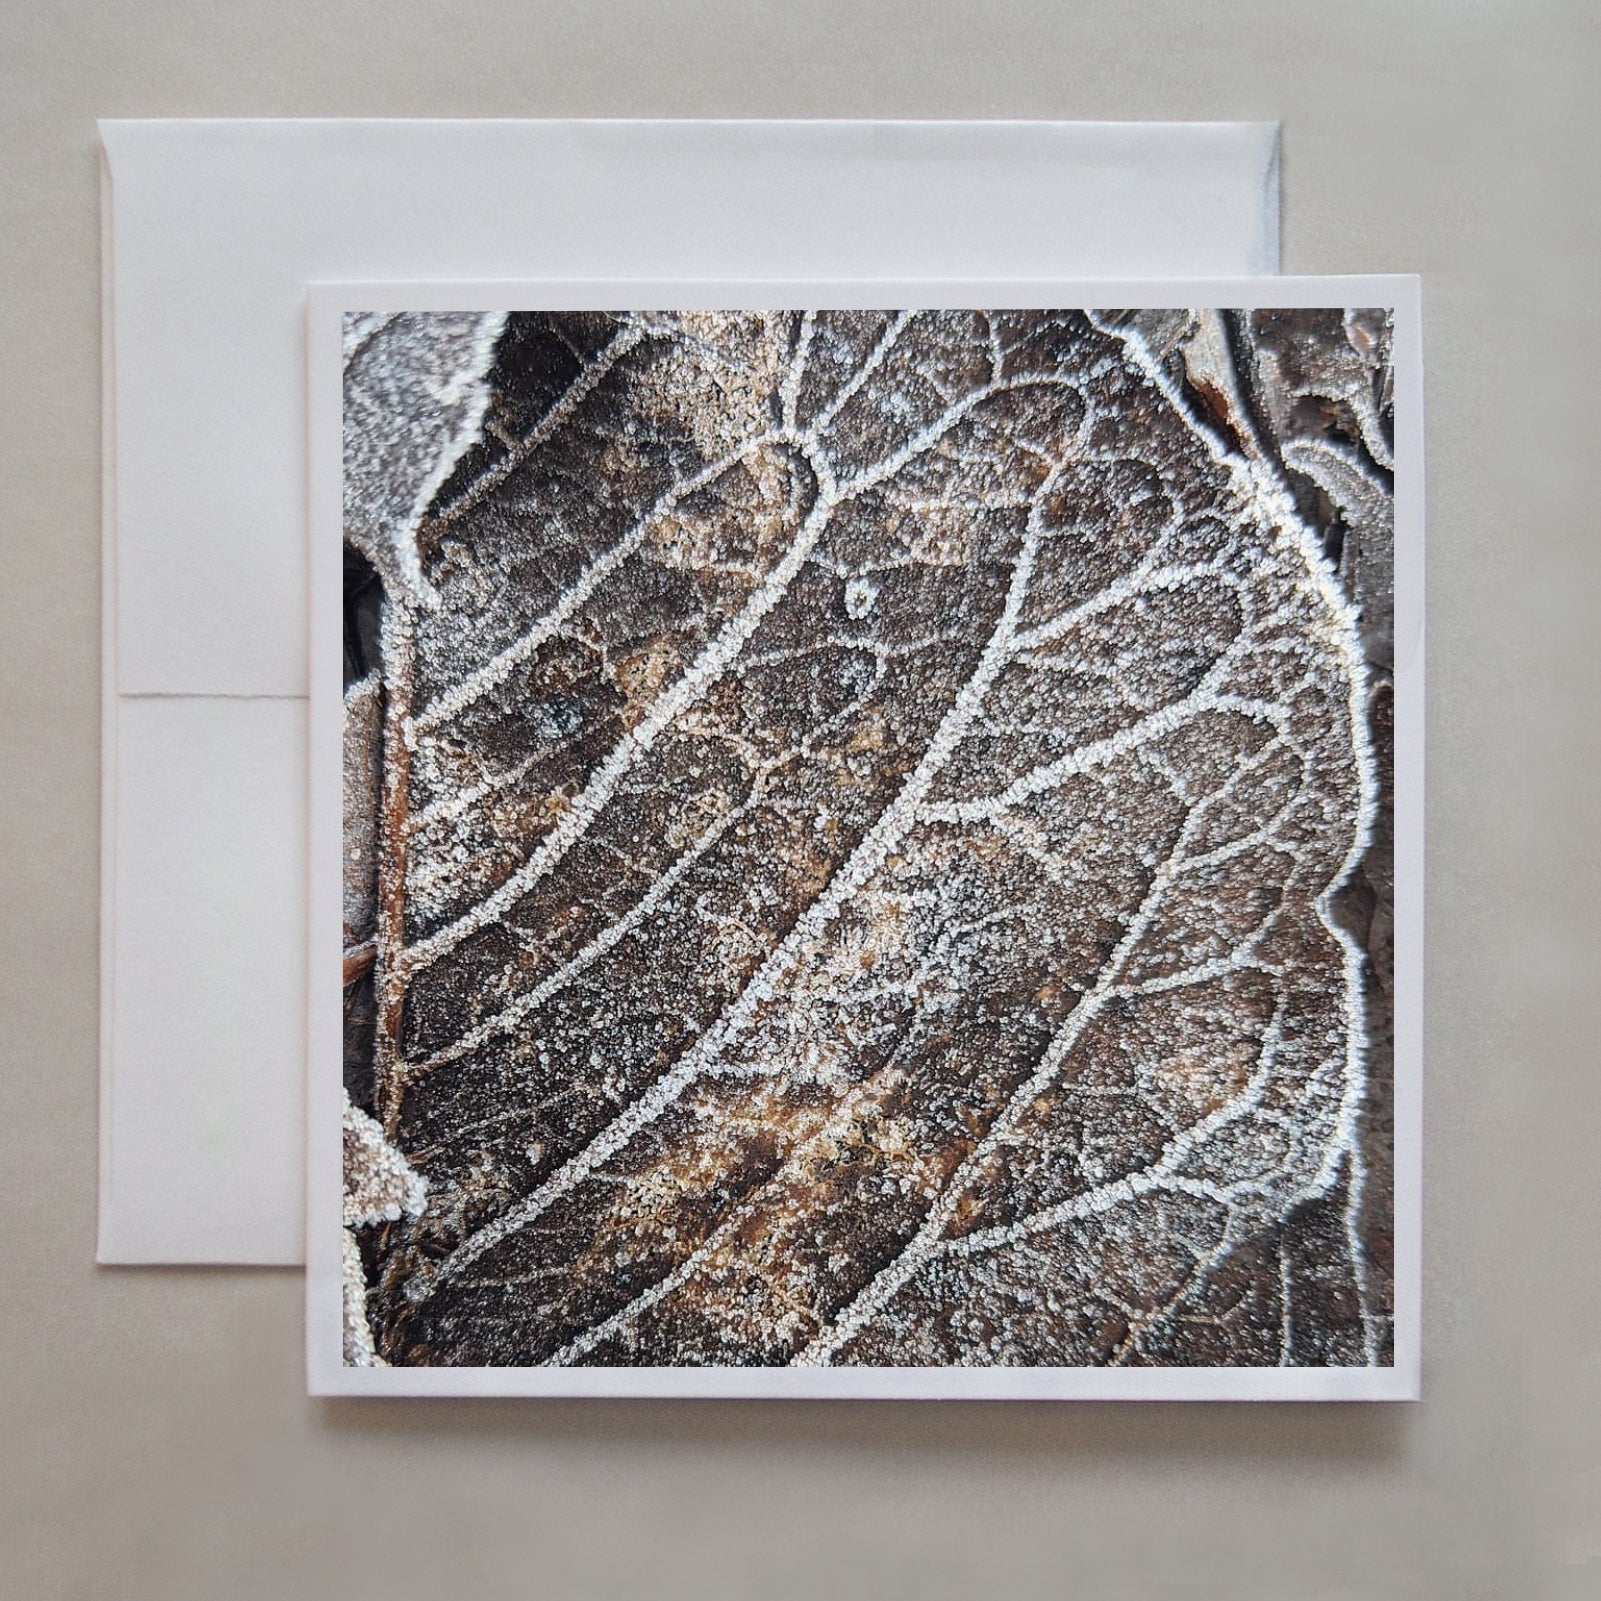 Nature creates delicate frost designs on this abstract photograph of a lifeless leaf by photographer Jennifer Echols.